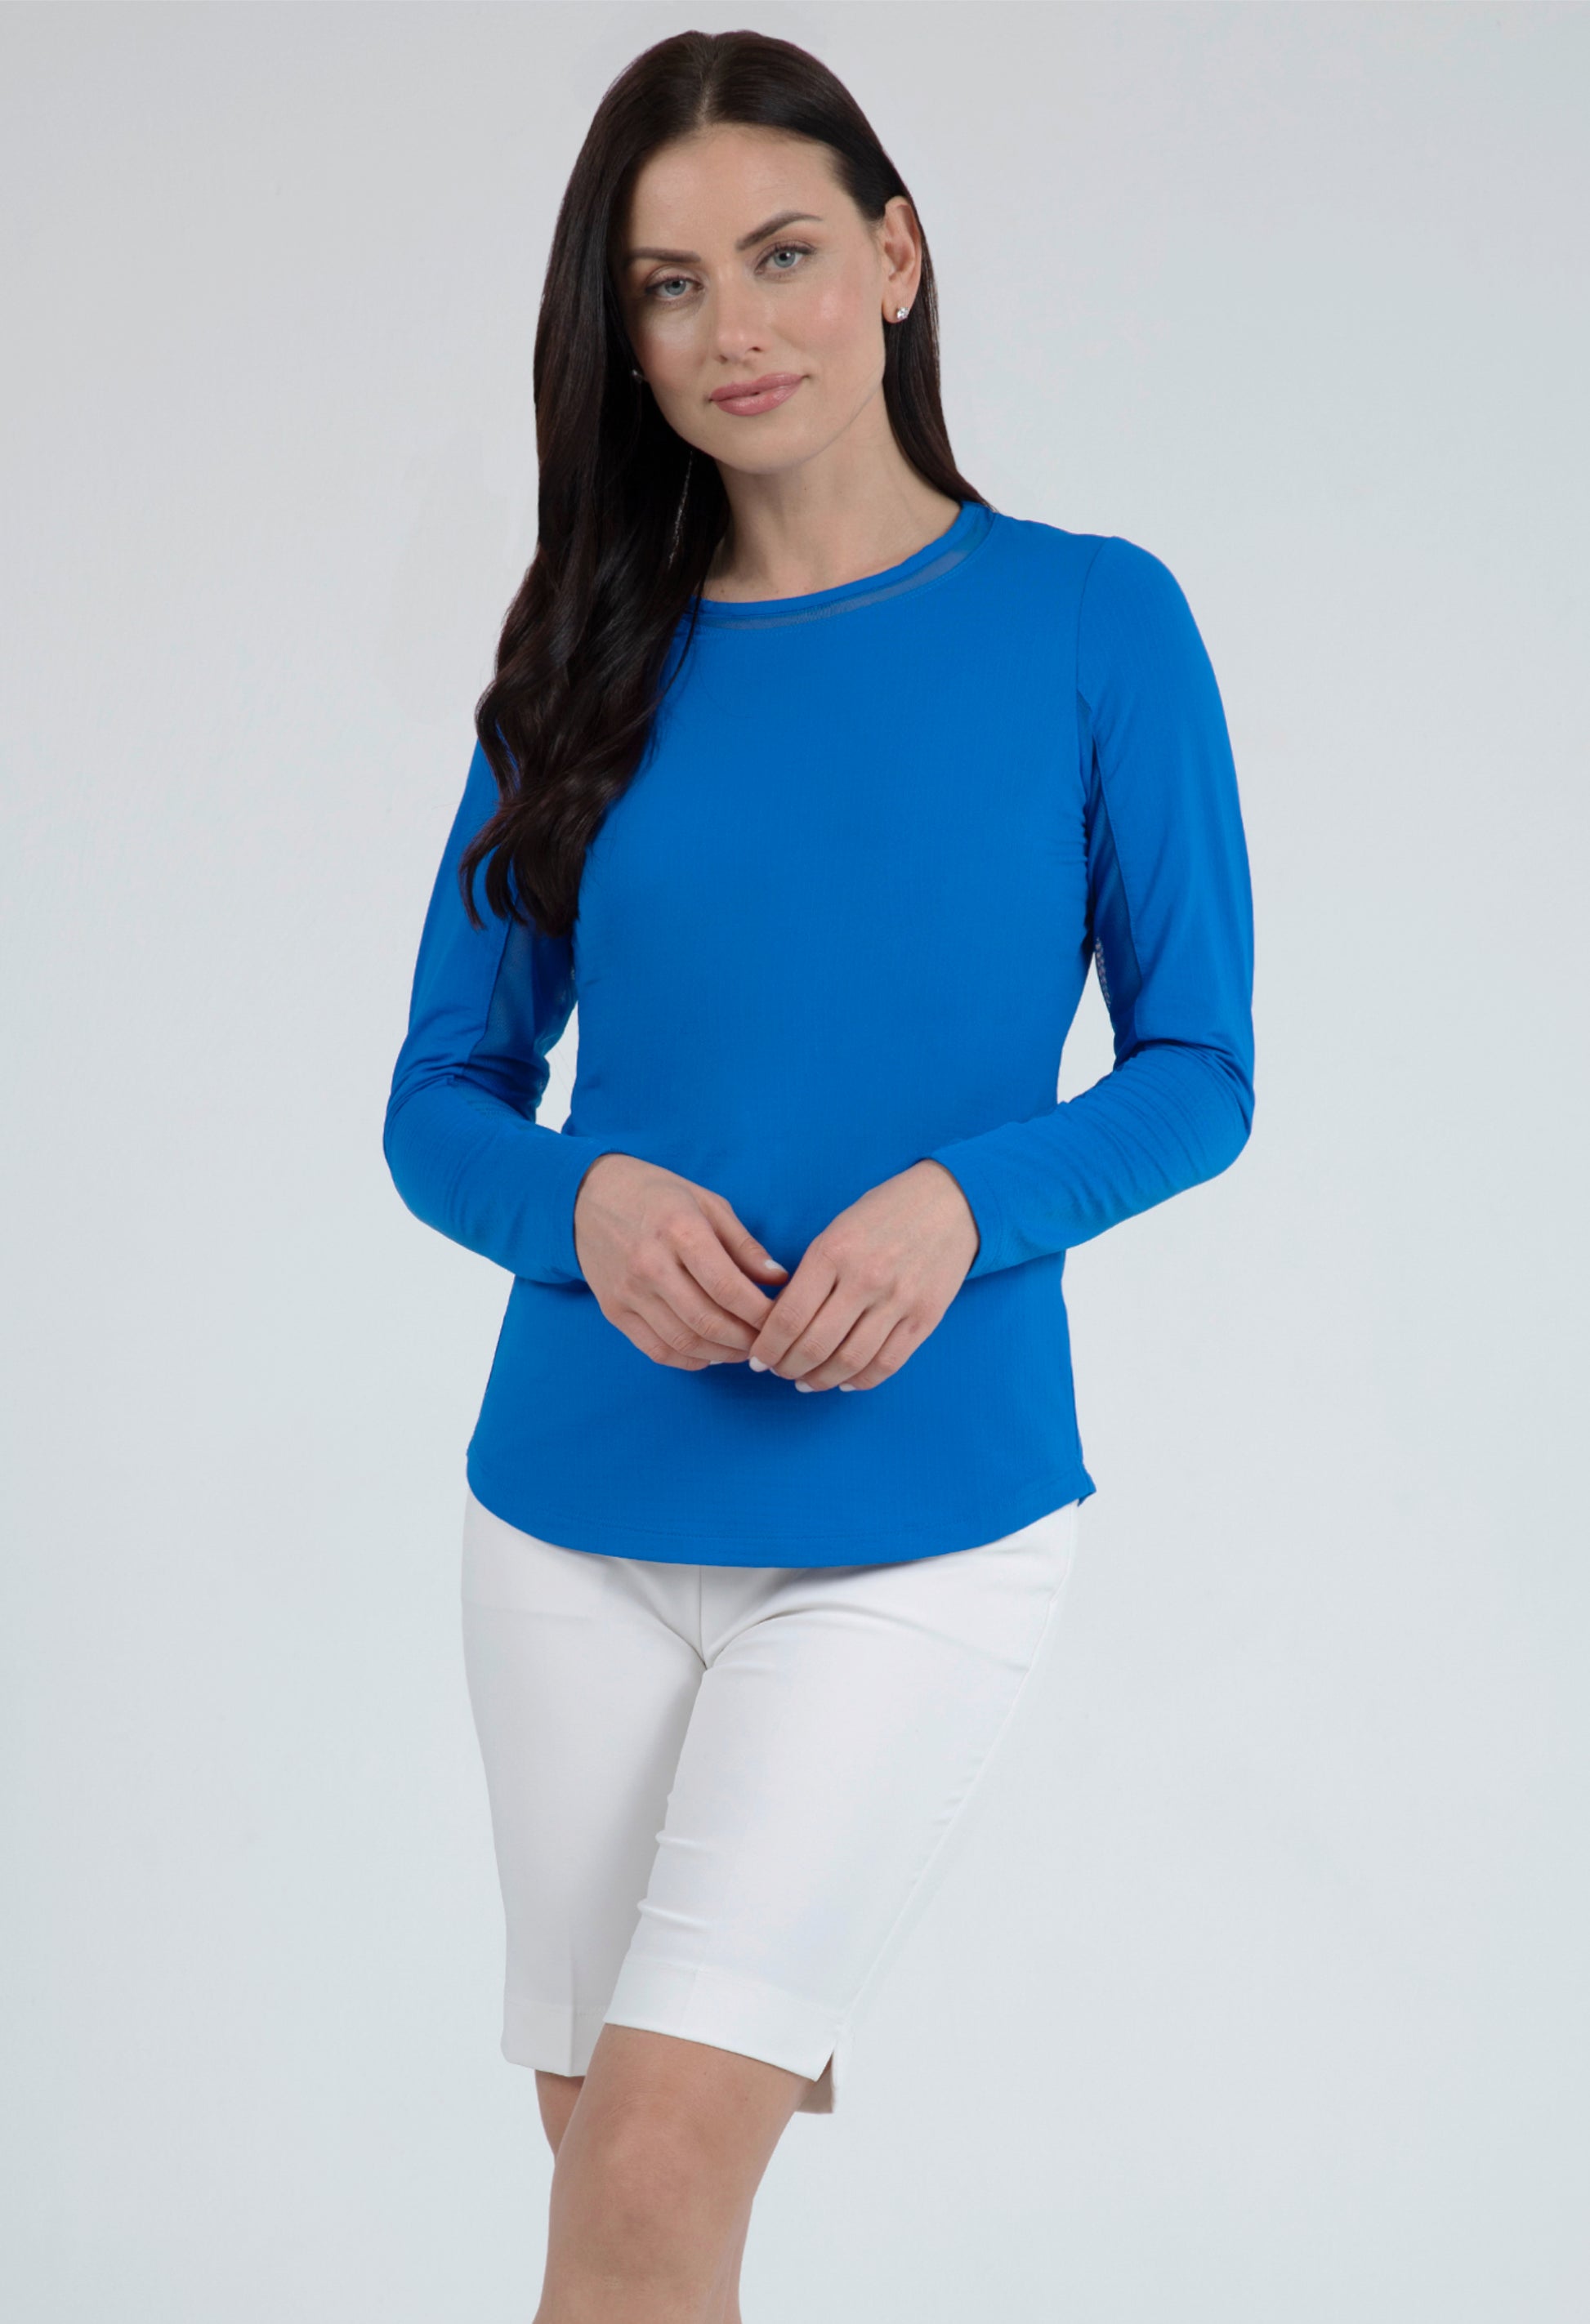 IBKÜL - Long Sleeve Crew Neck with Mesh - 83000 - Color: Blue